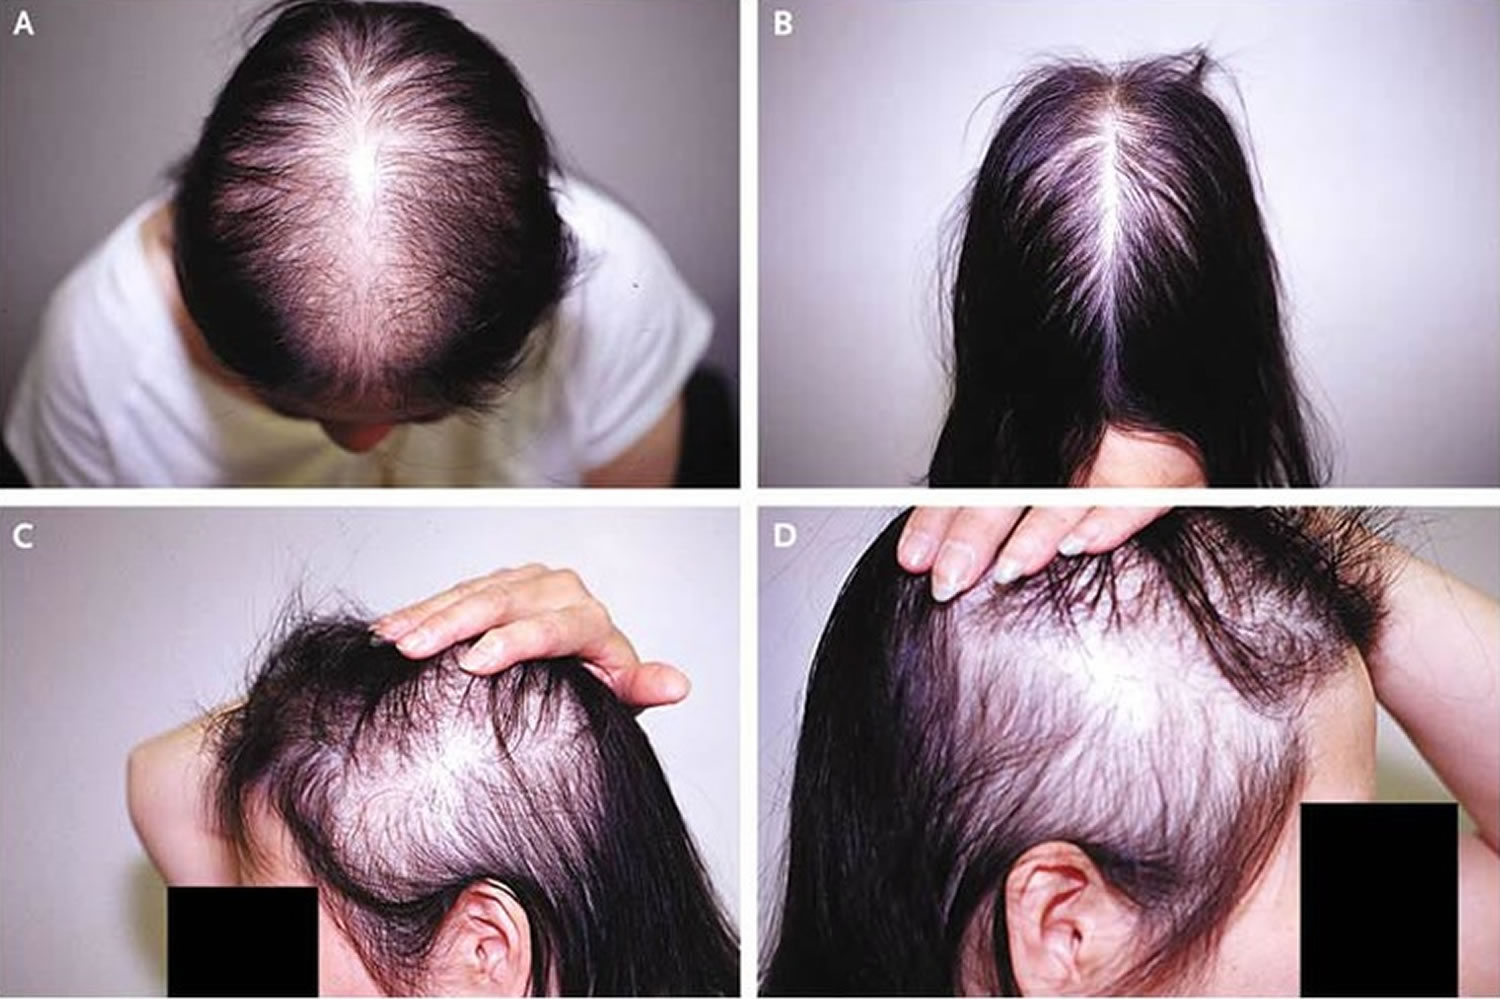 Study details relative efficacy of different drugs for treating Androgenic  alopecia